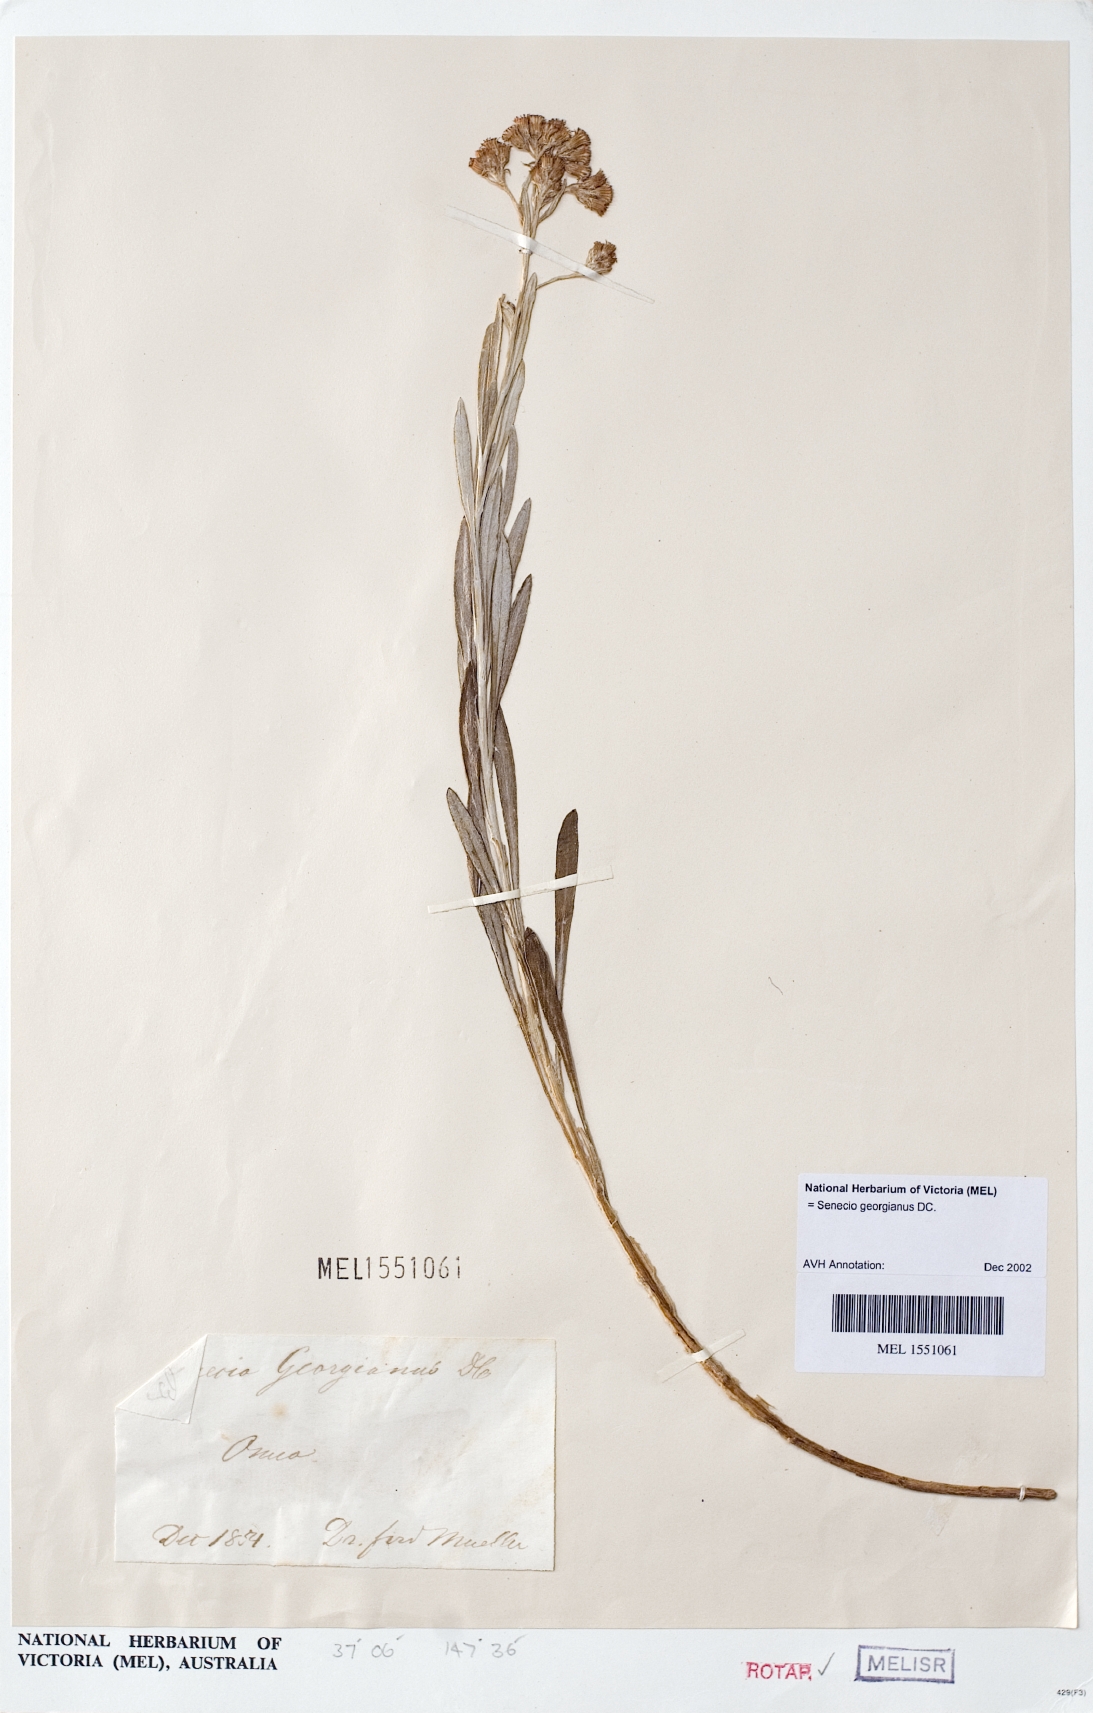 : A specimen of the Grey Groundsel, Senecio georgianus DC., collected in East Gippsland in 1854. This species, which is presumed extinct in the wild, is only know from herbarium specimens.